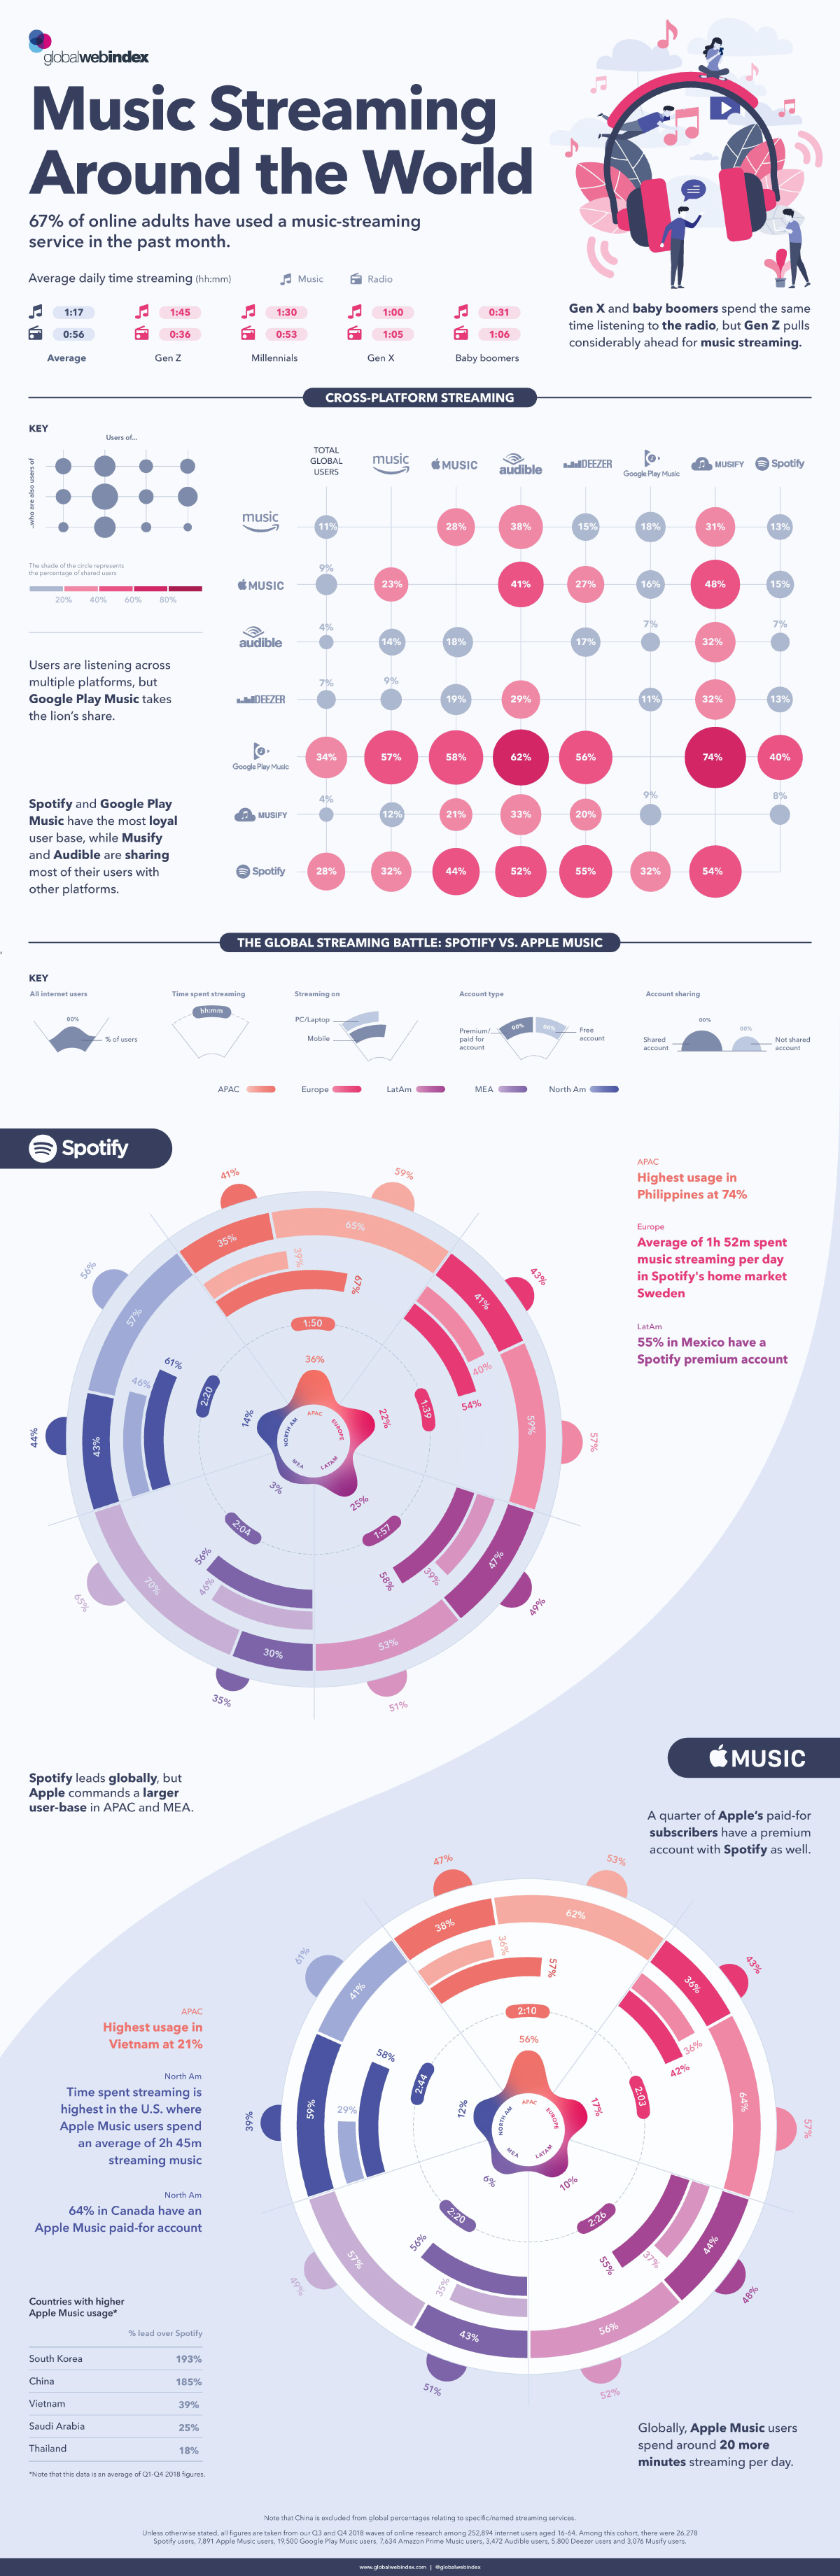 Music Streaming Infographic